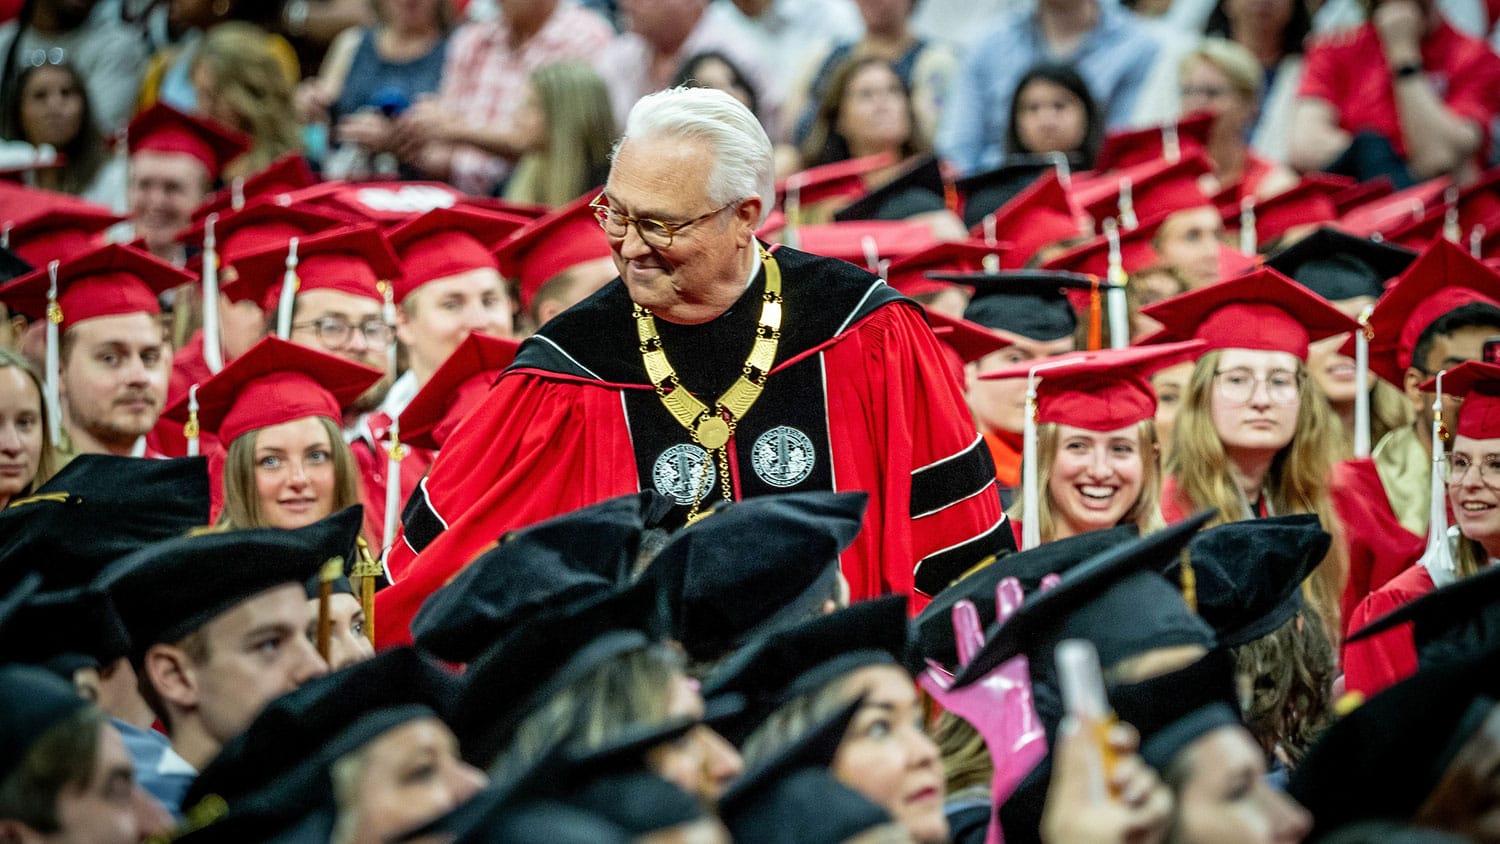 Chancellor Randy Woodson stands among a crowd of new graduates at commencement.